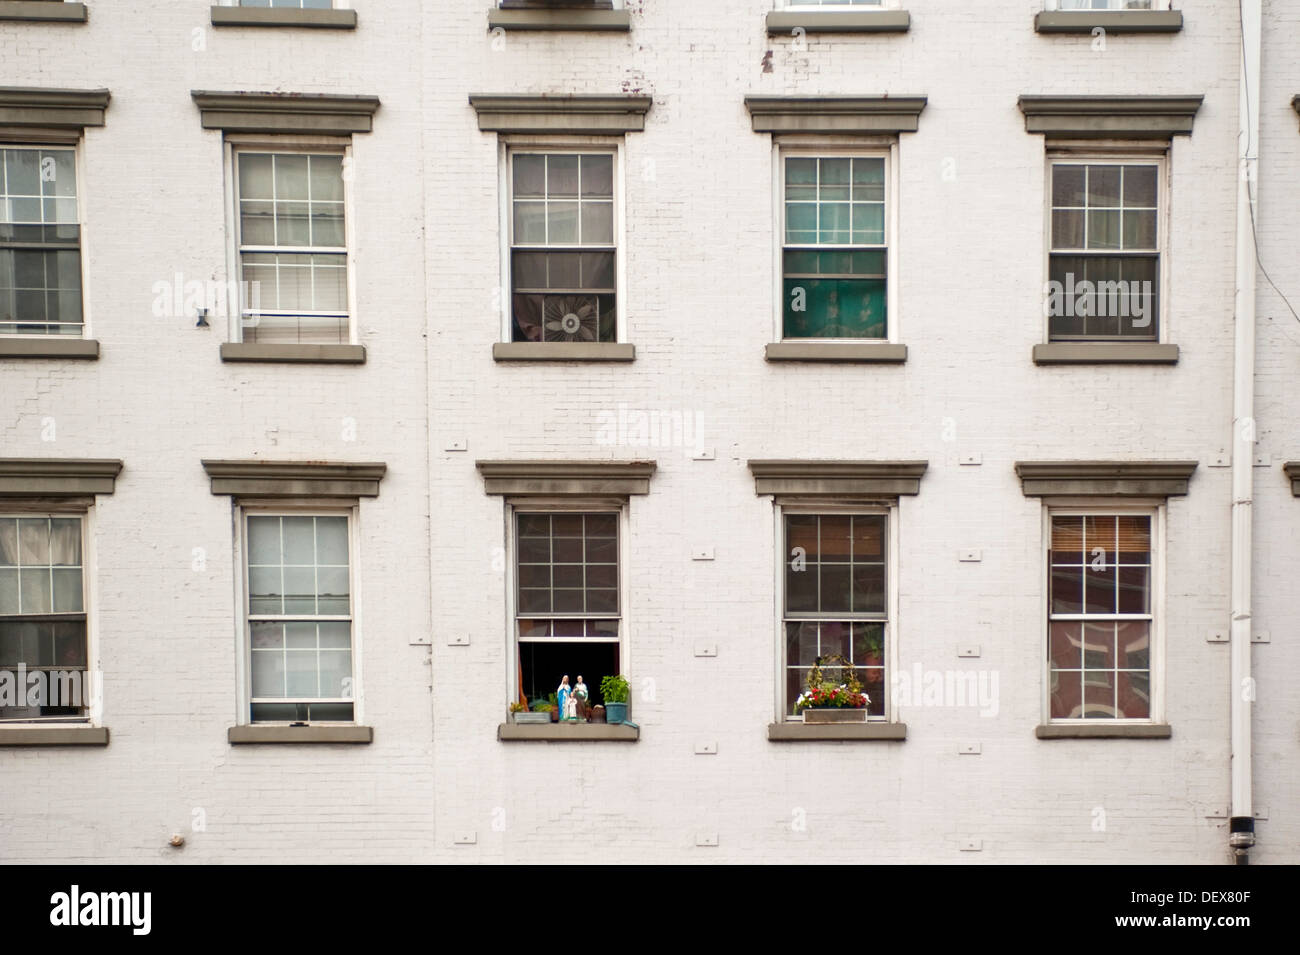 A straight on facade view of an old apartment building in New York City showing rows of windows with religious statues on the Stock Photo